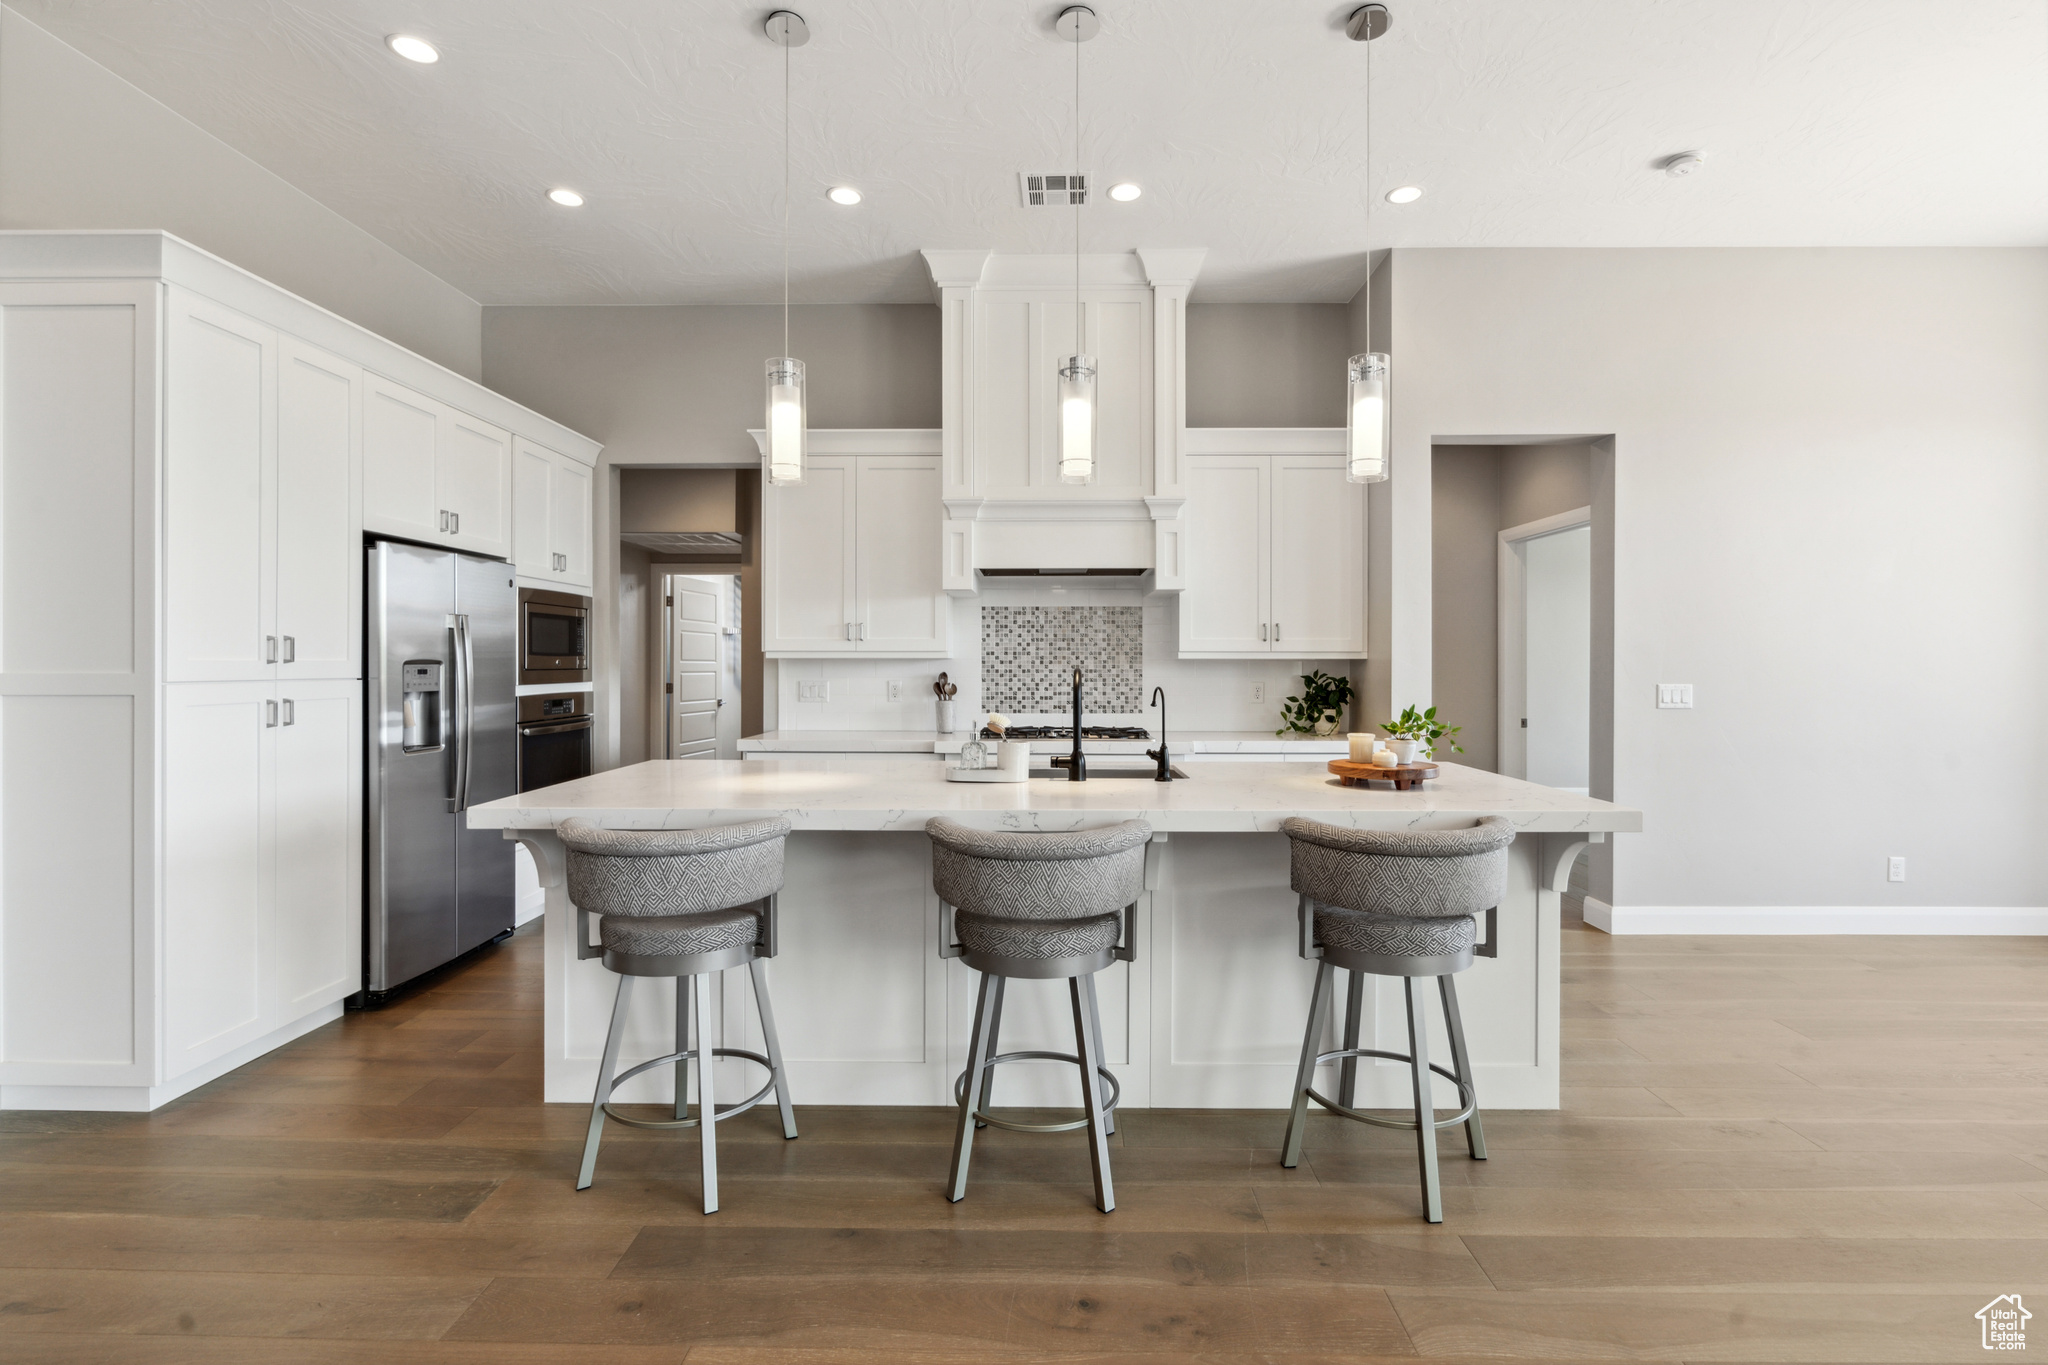 Kitchen featuring appliances with stainless steel finishes, pendant lighting, hardwood / wood-style flooring, and white cabinetry